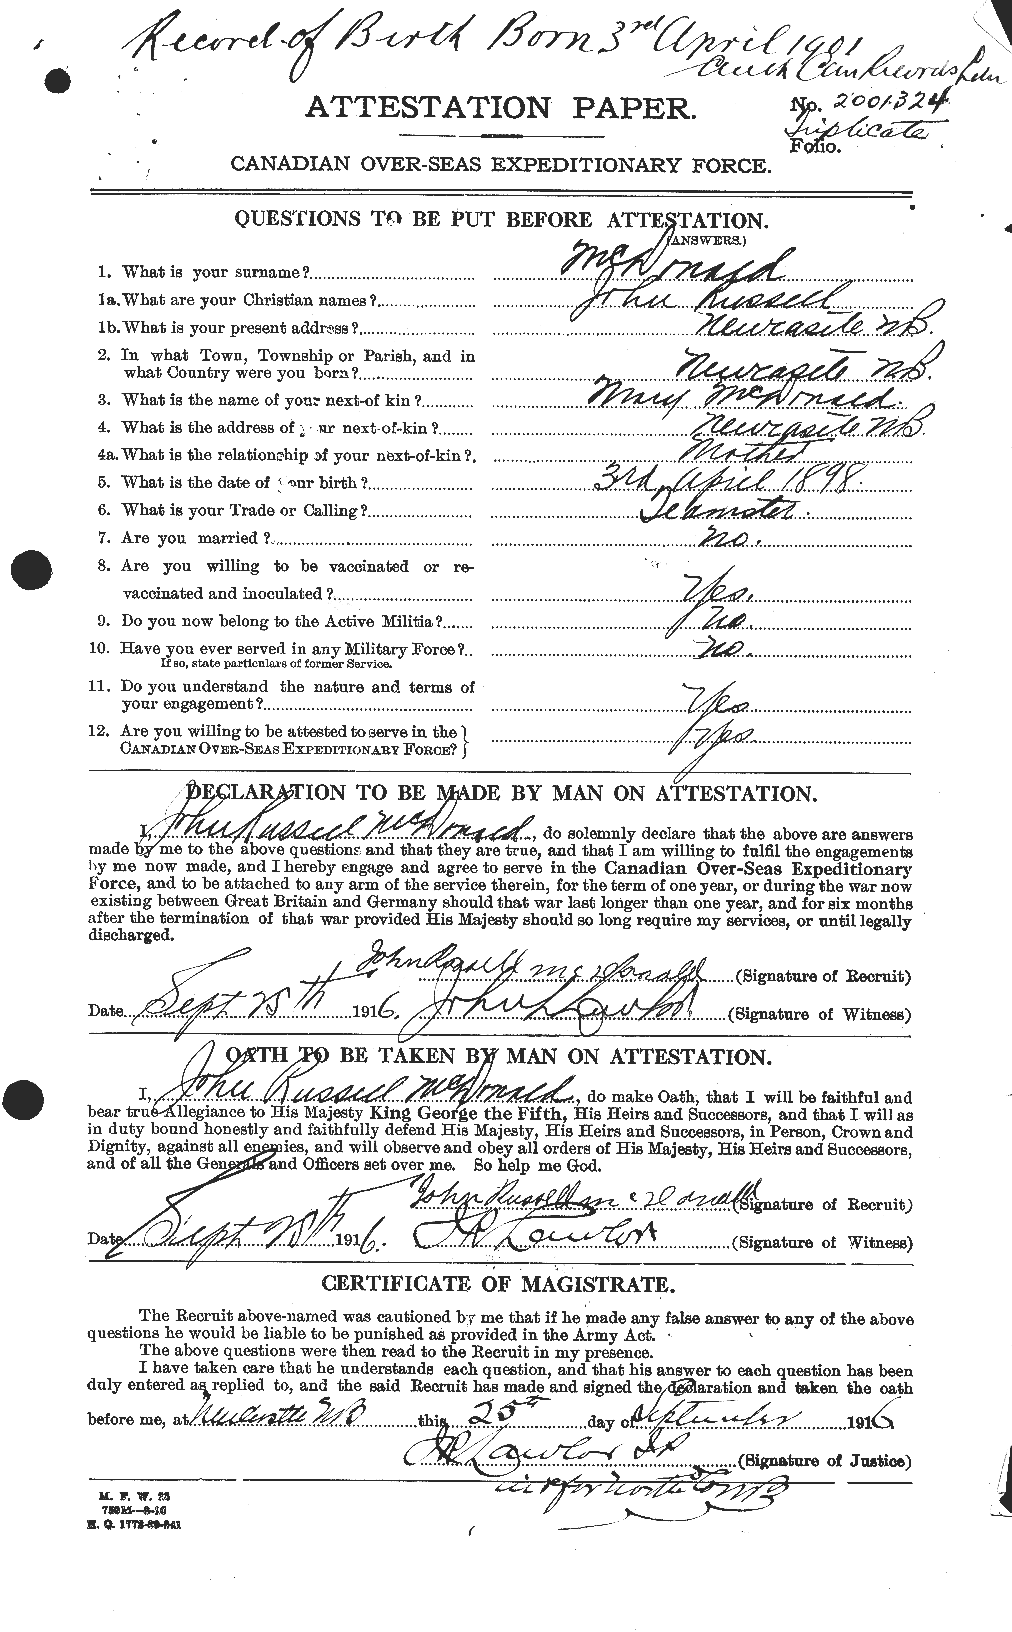 Personnel Records of the First World War - CEF 516461a